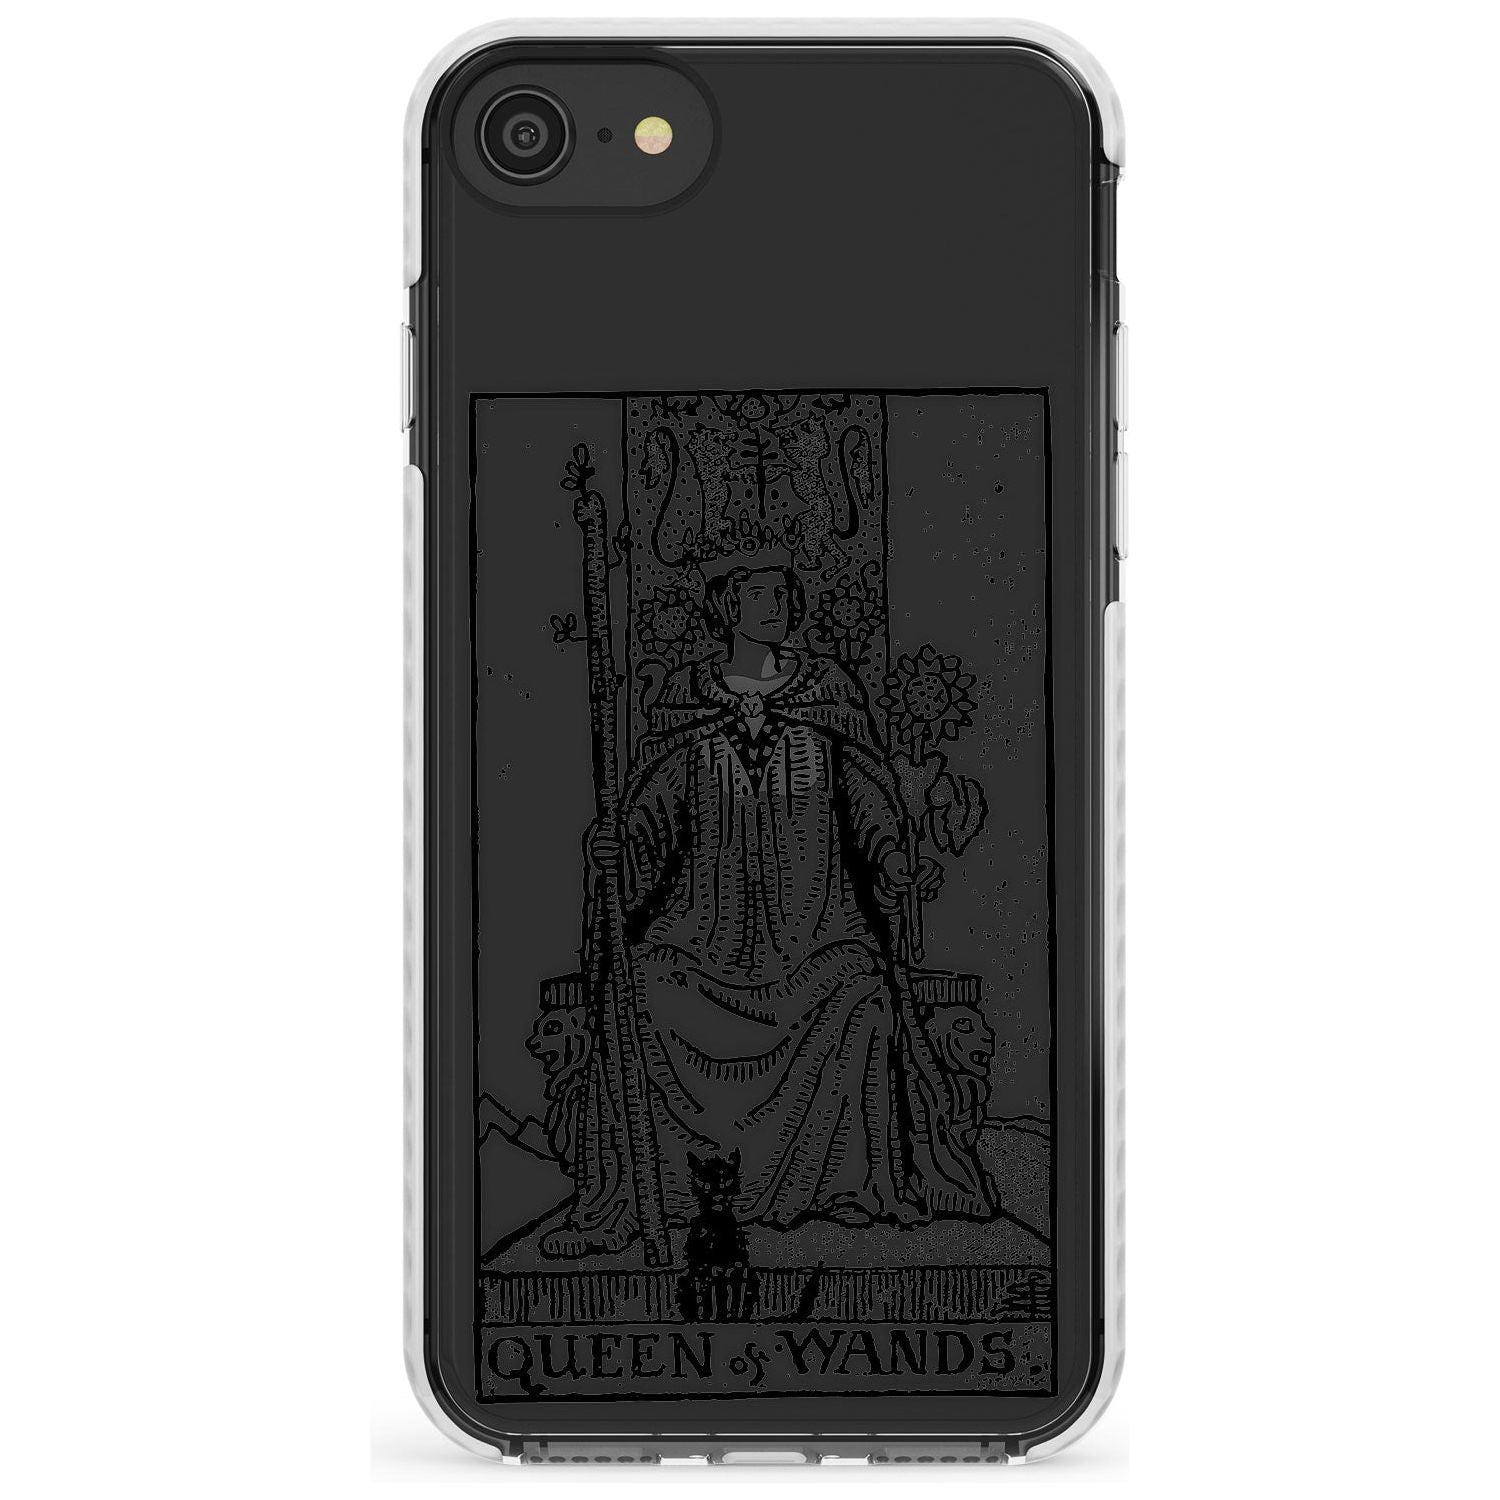 Queen of Wands Tarot Card - Transparent Slim TPU Phone Case for iPhone SE 8 7 Plus